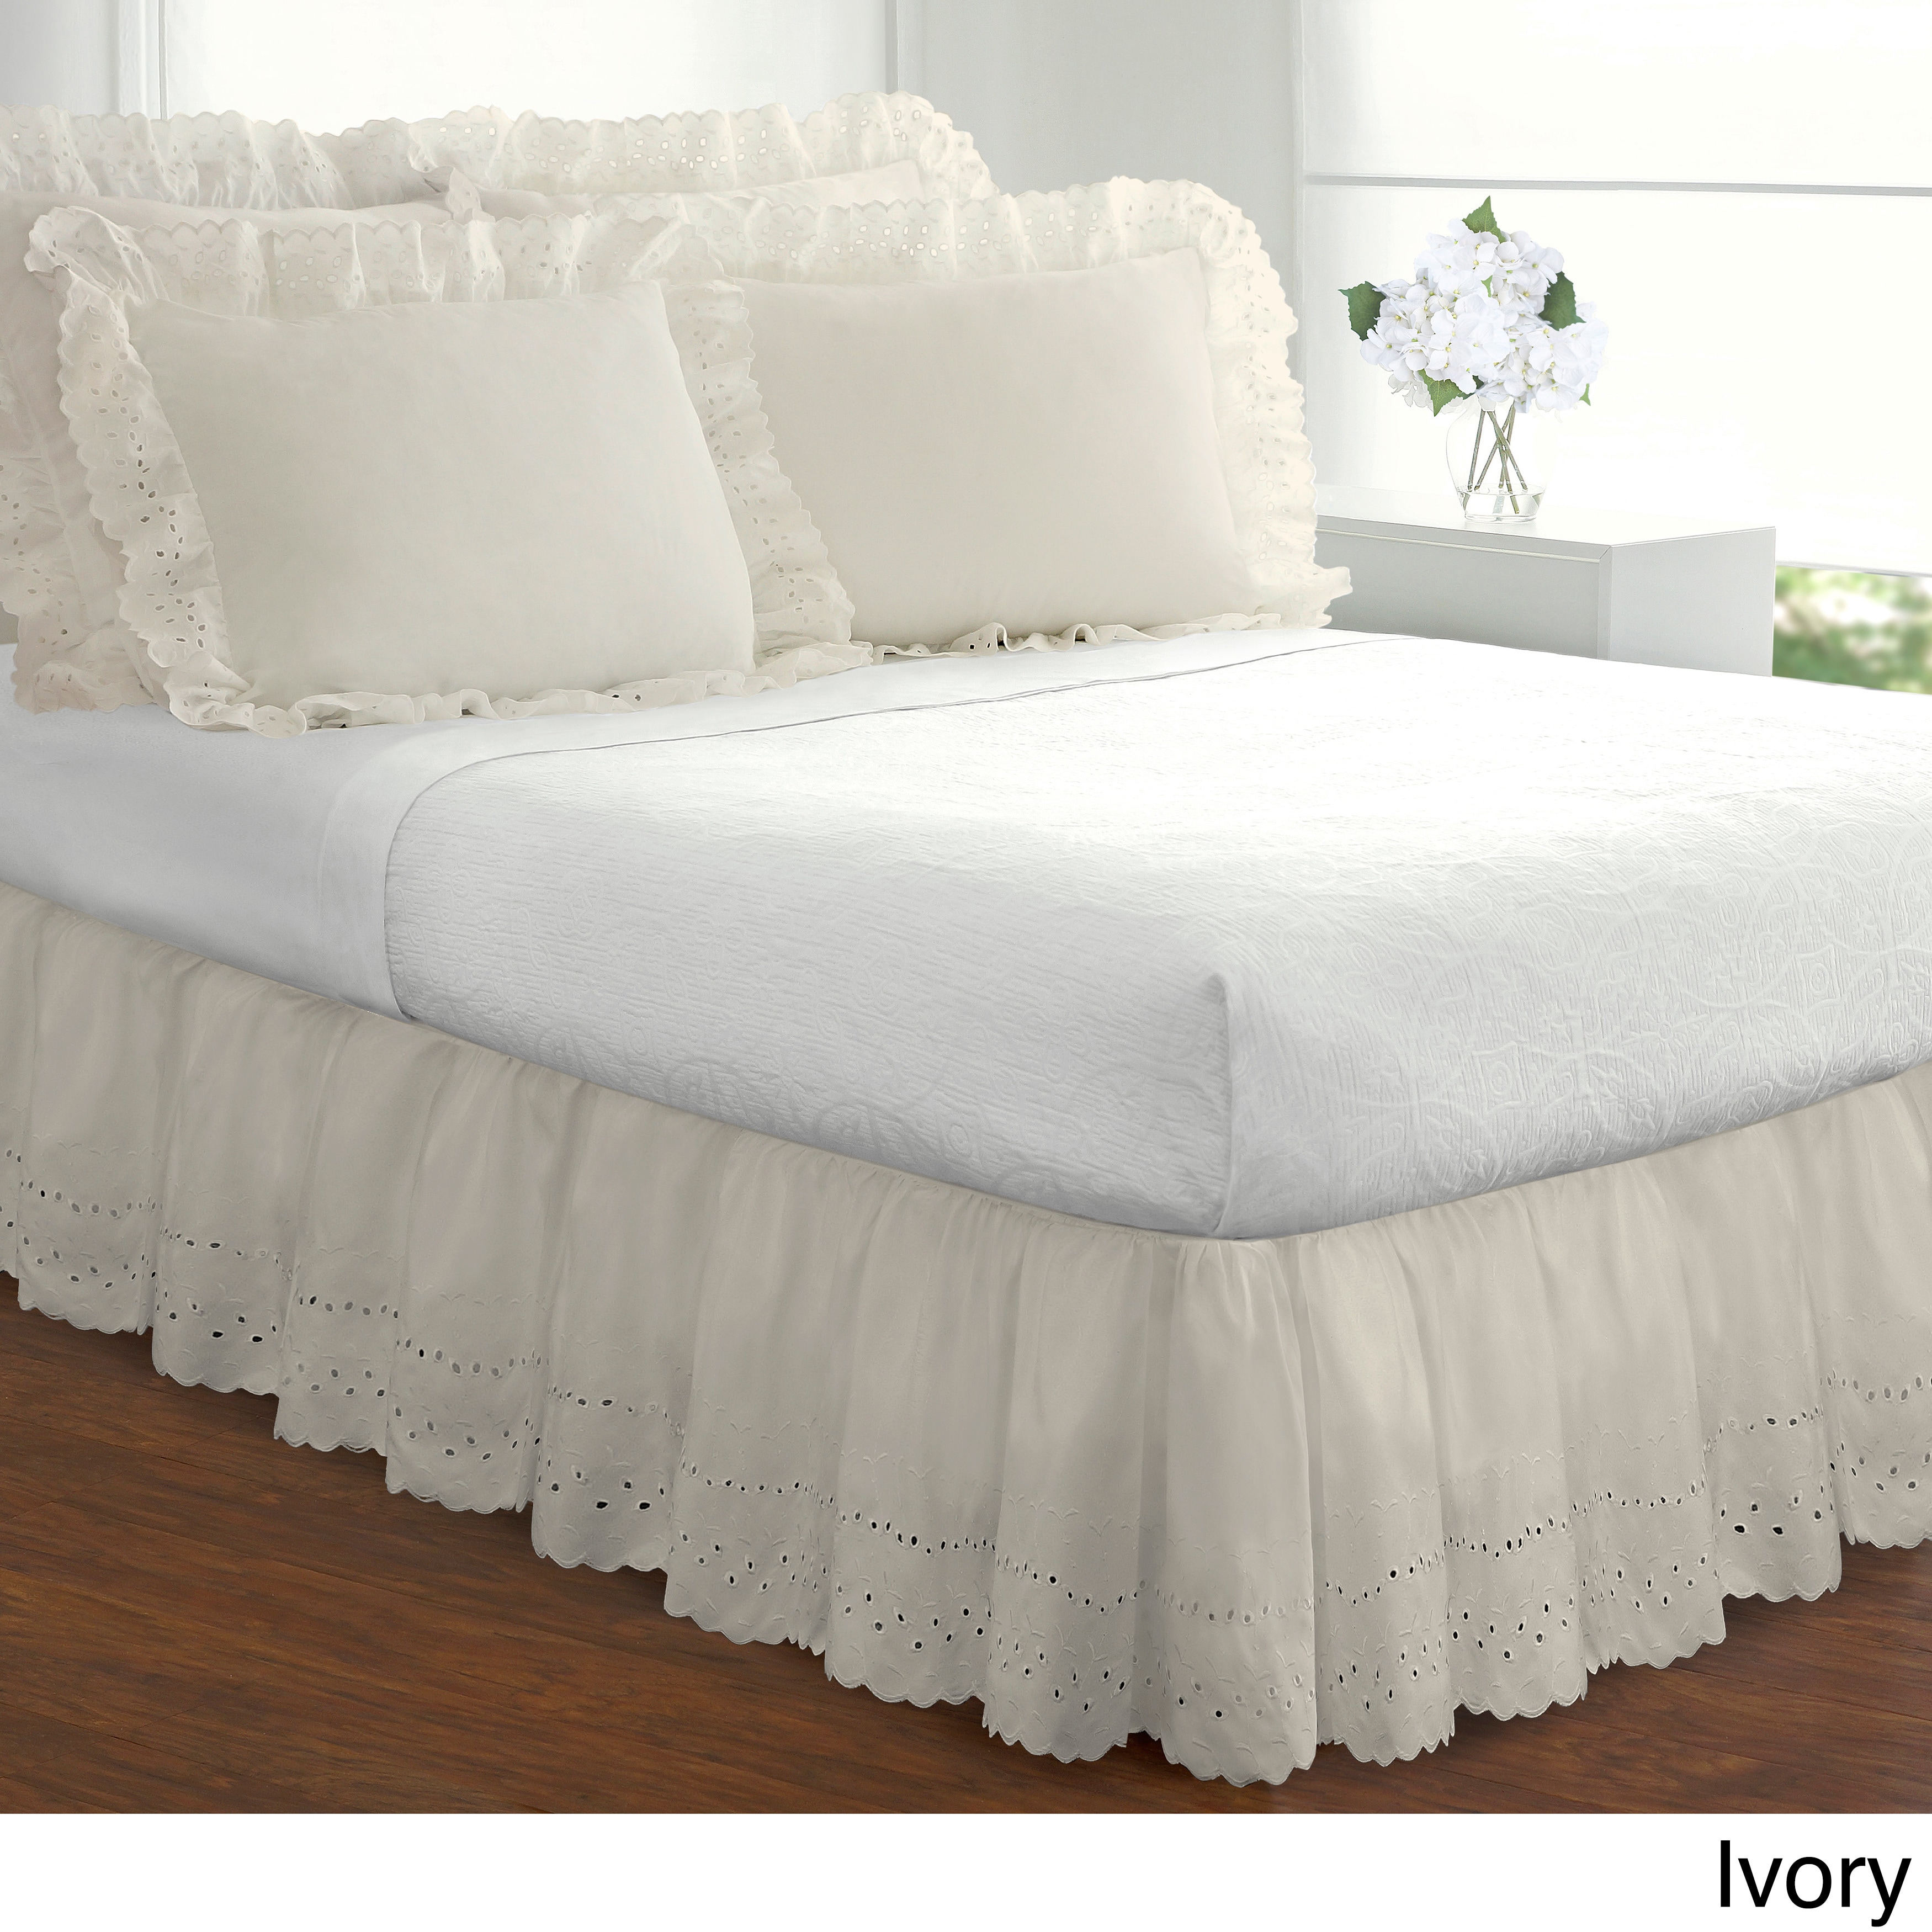 bed skirt full bed bath and beyond